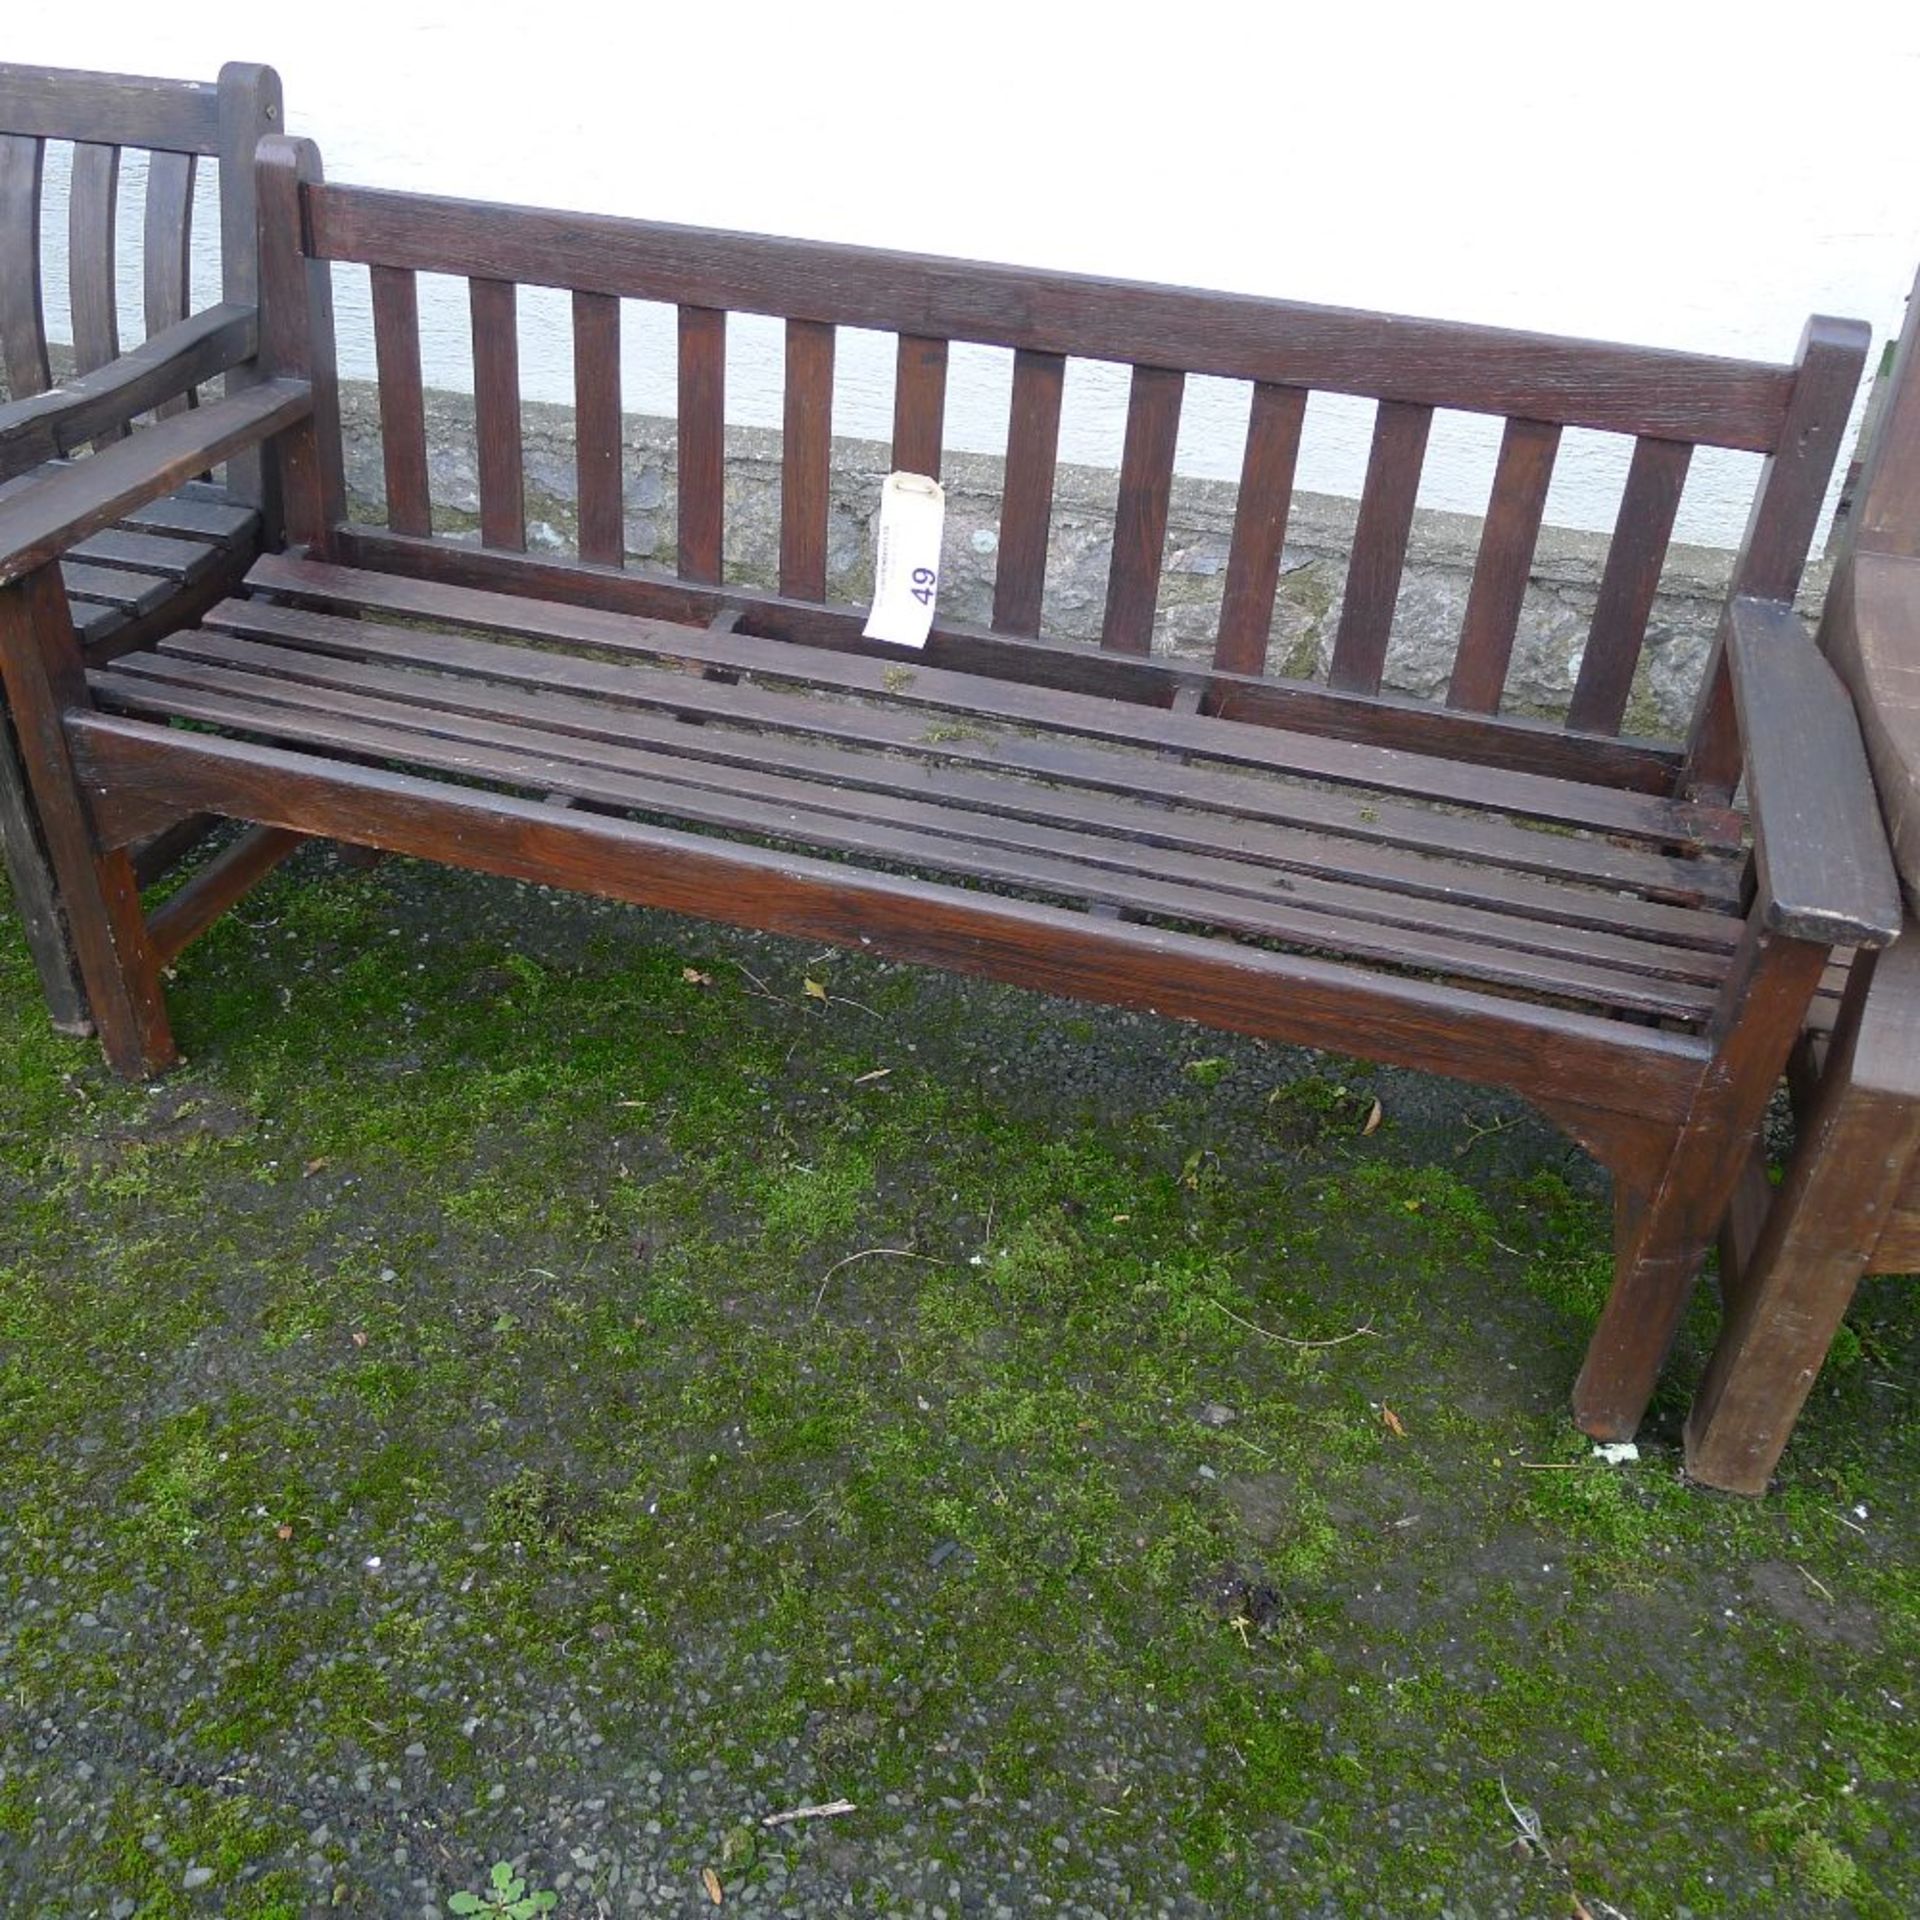 1 three seater timber garden bench (located outside junior school)